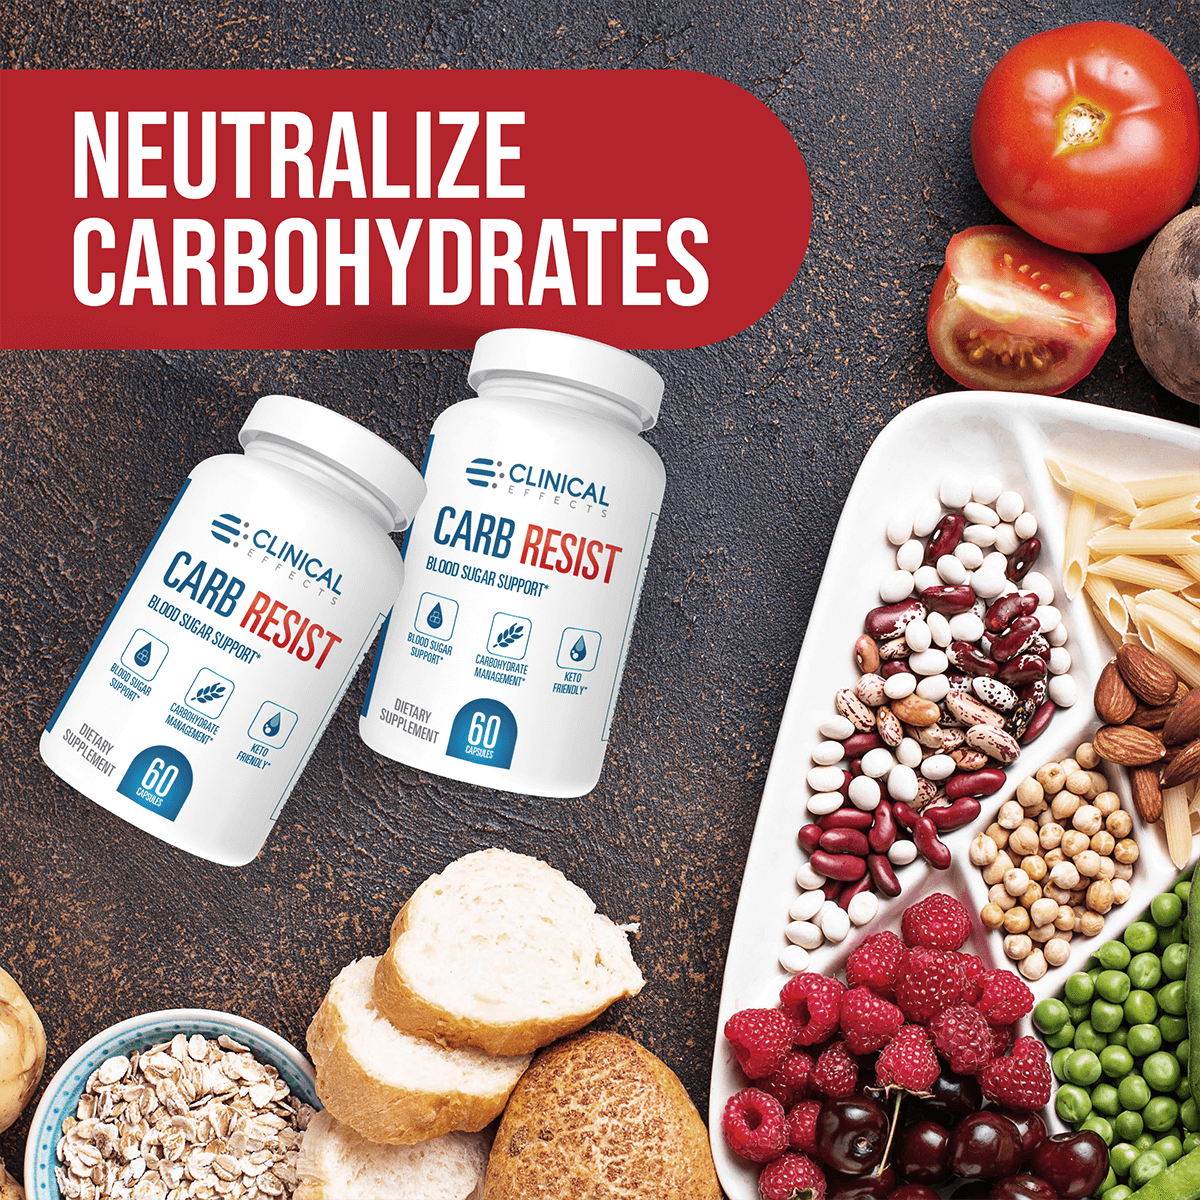 Neutralize carbohydrates